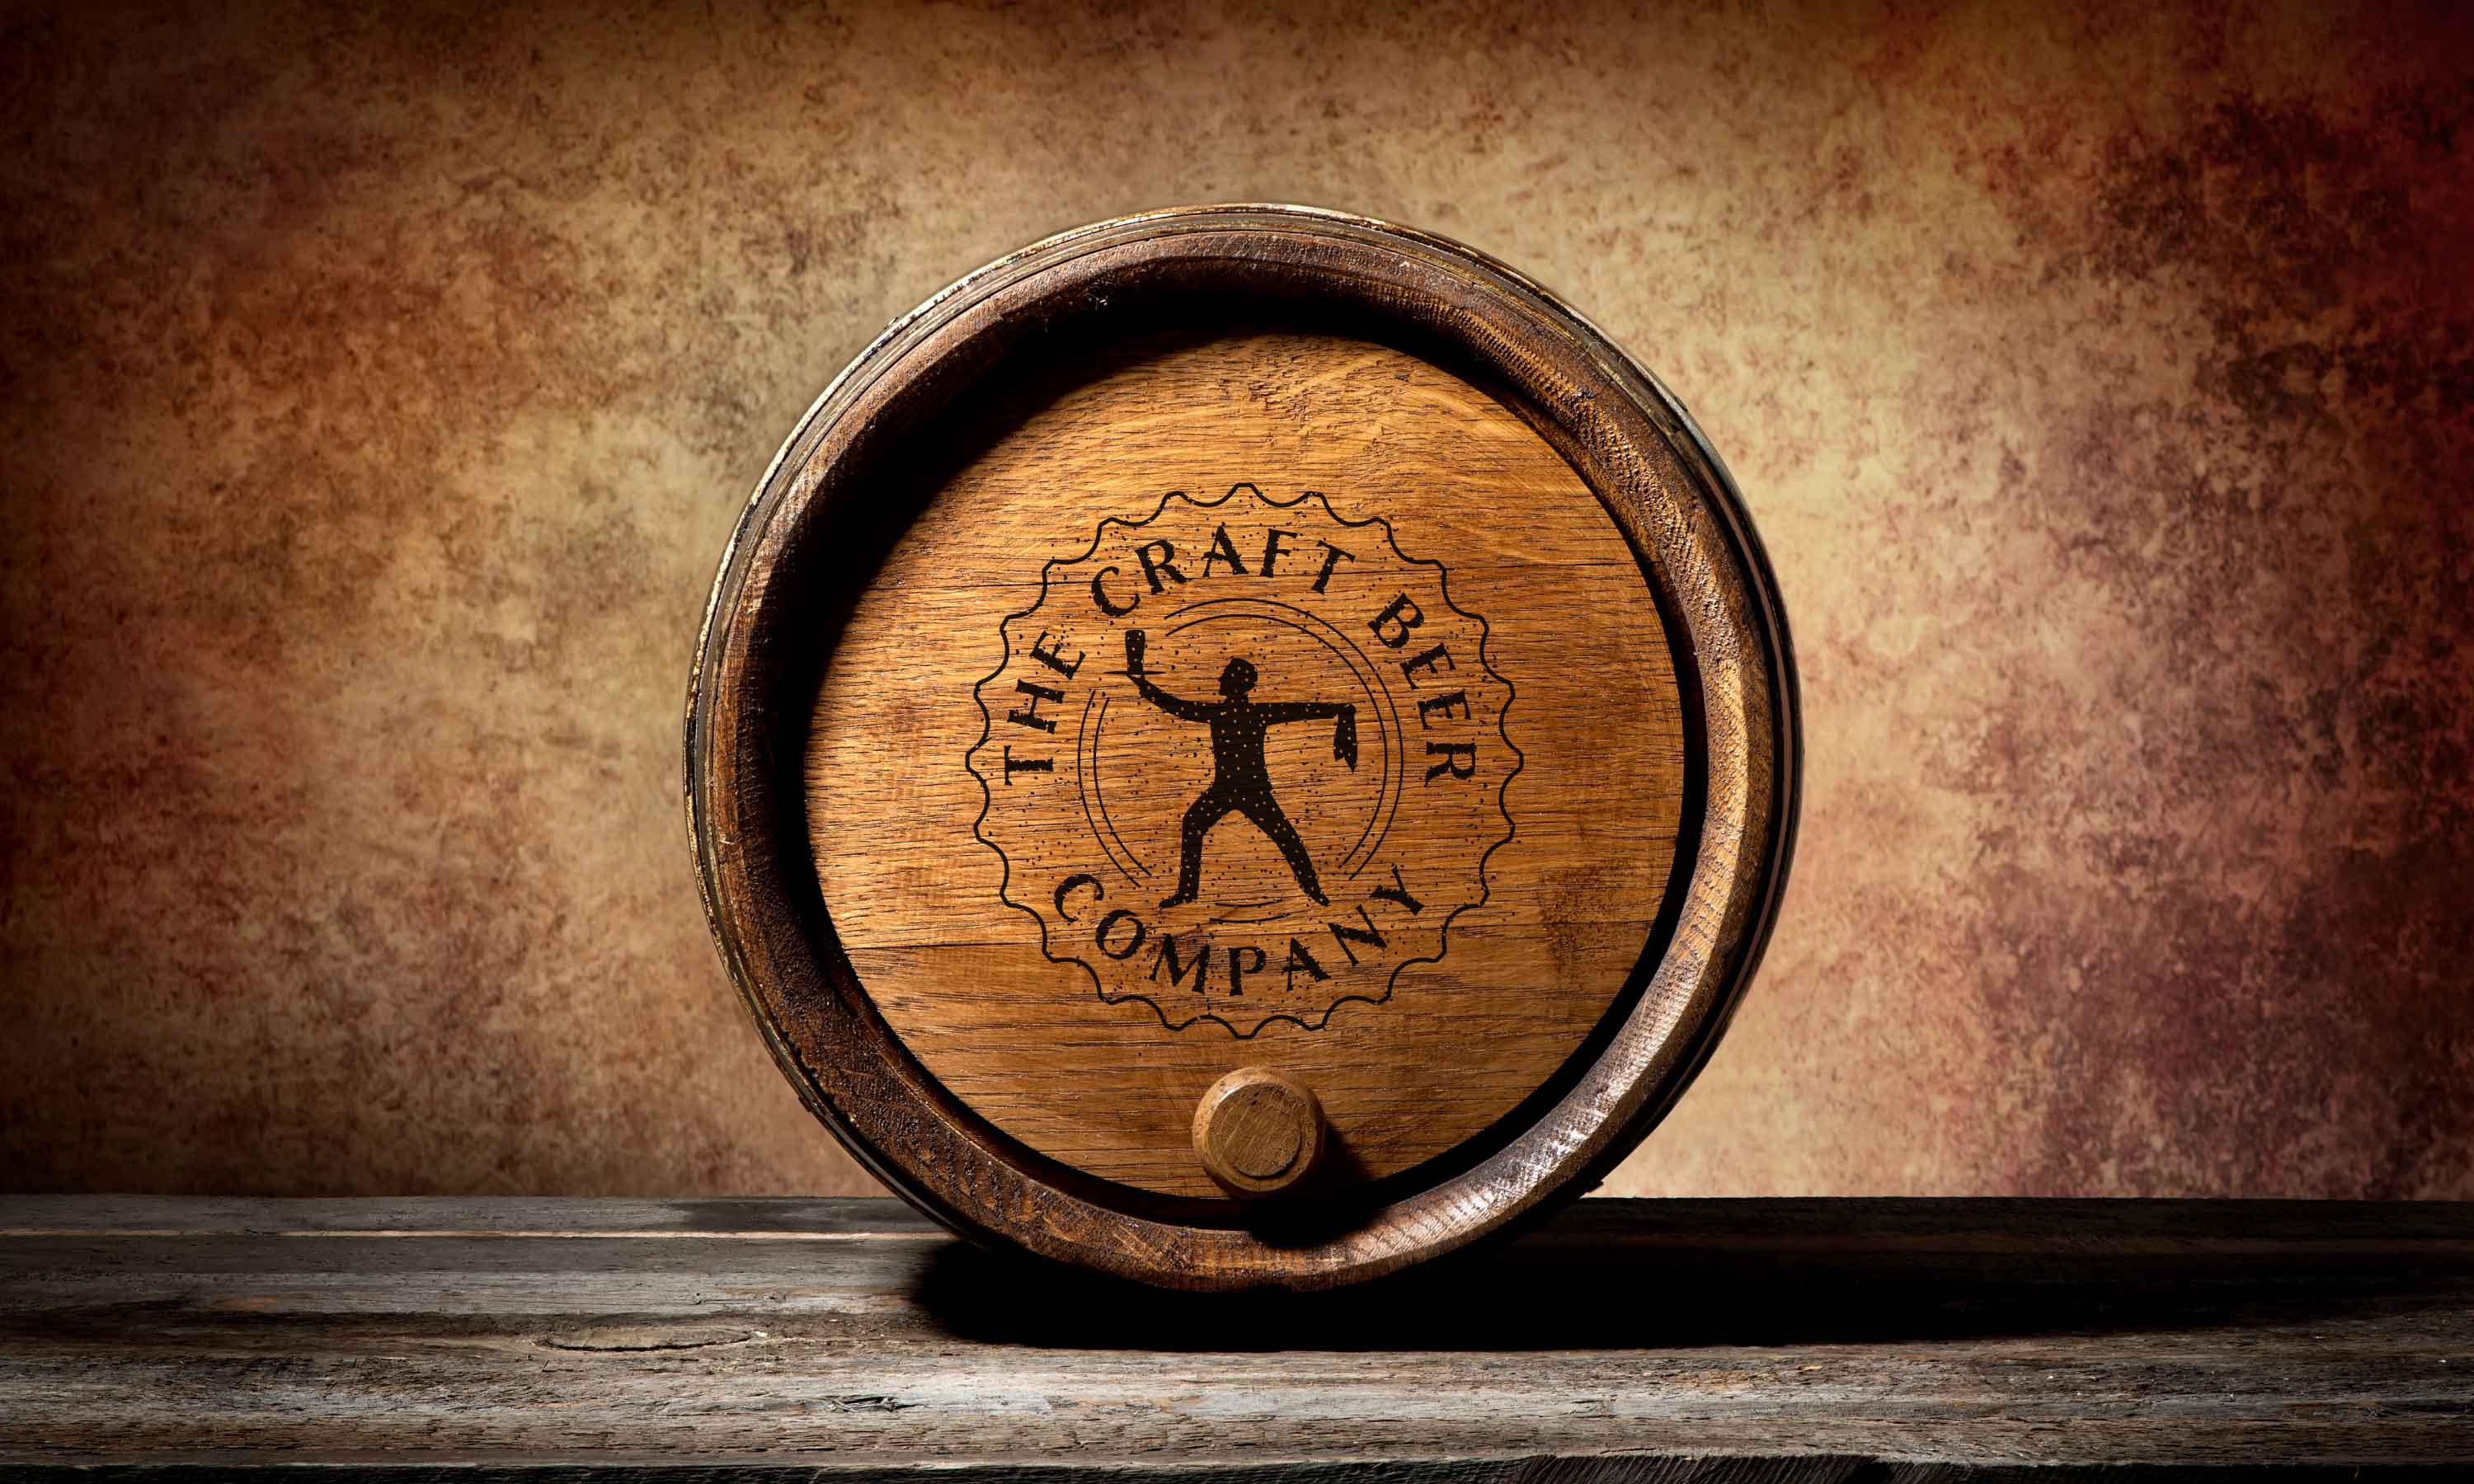 The Craft Beer Company